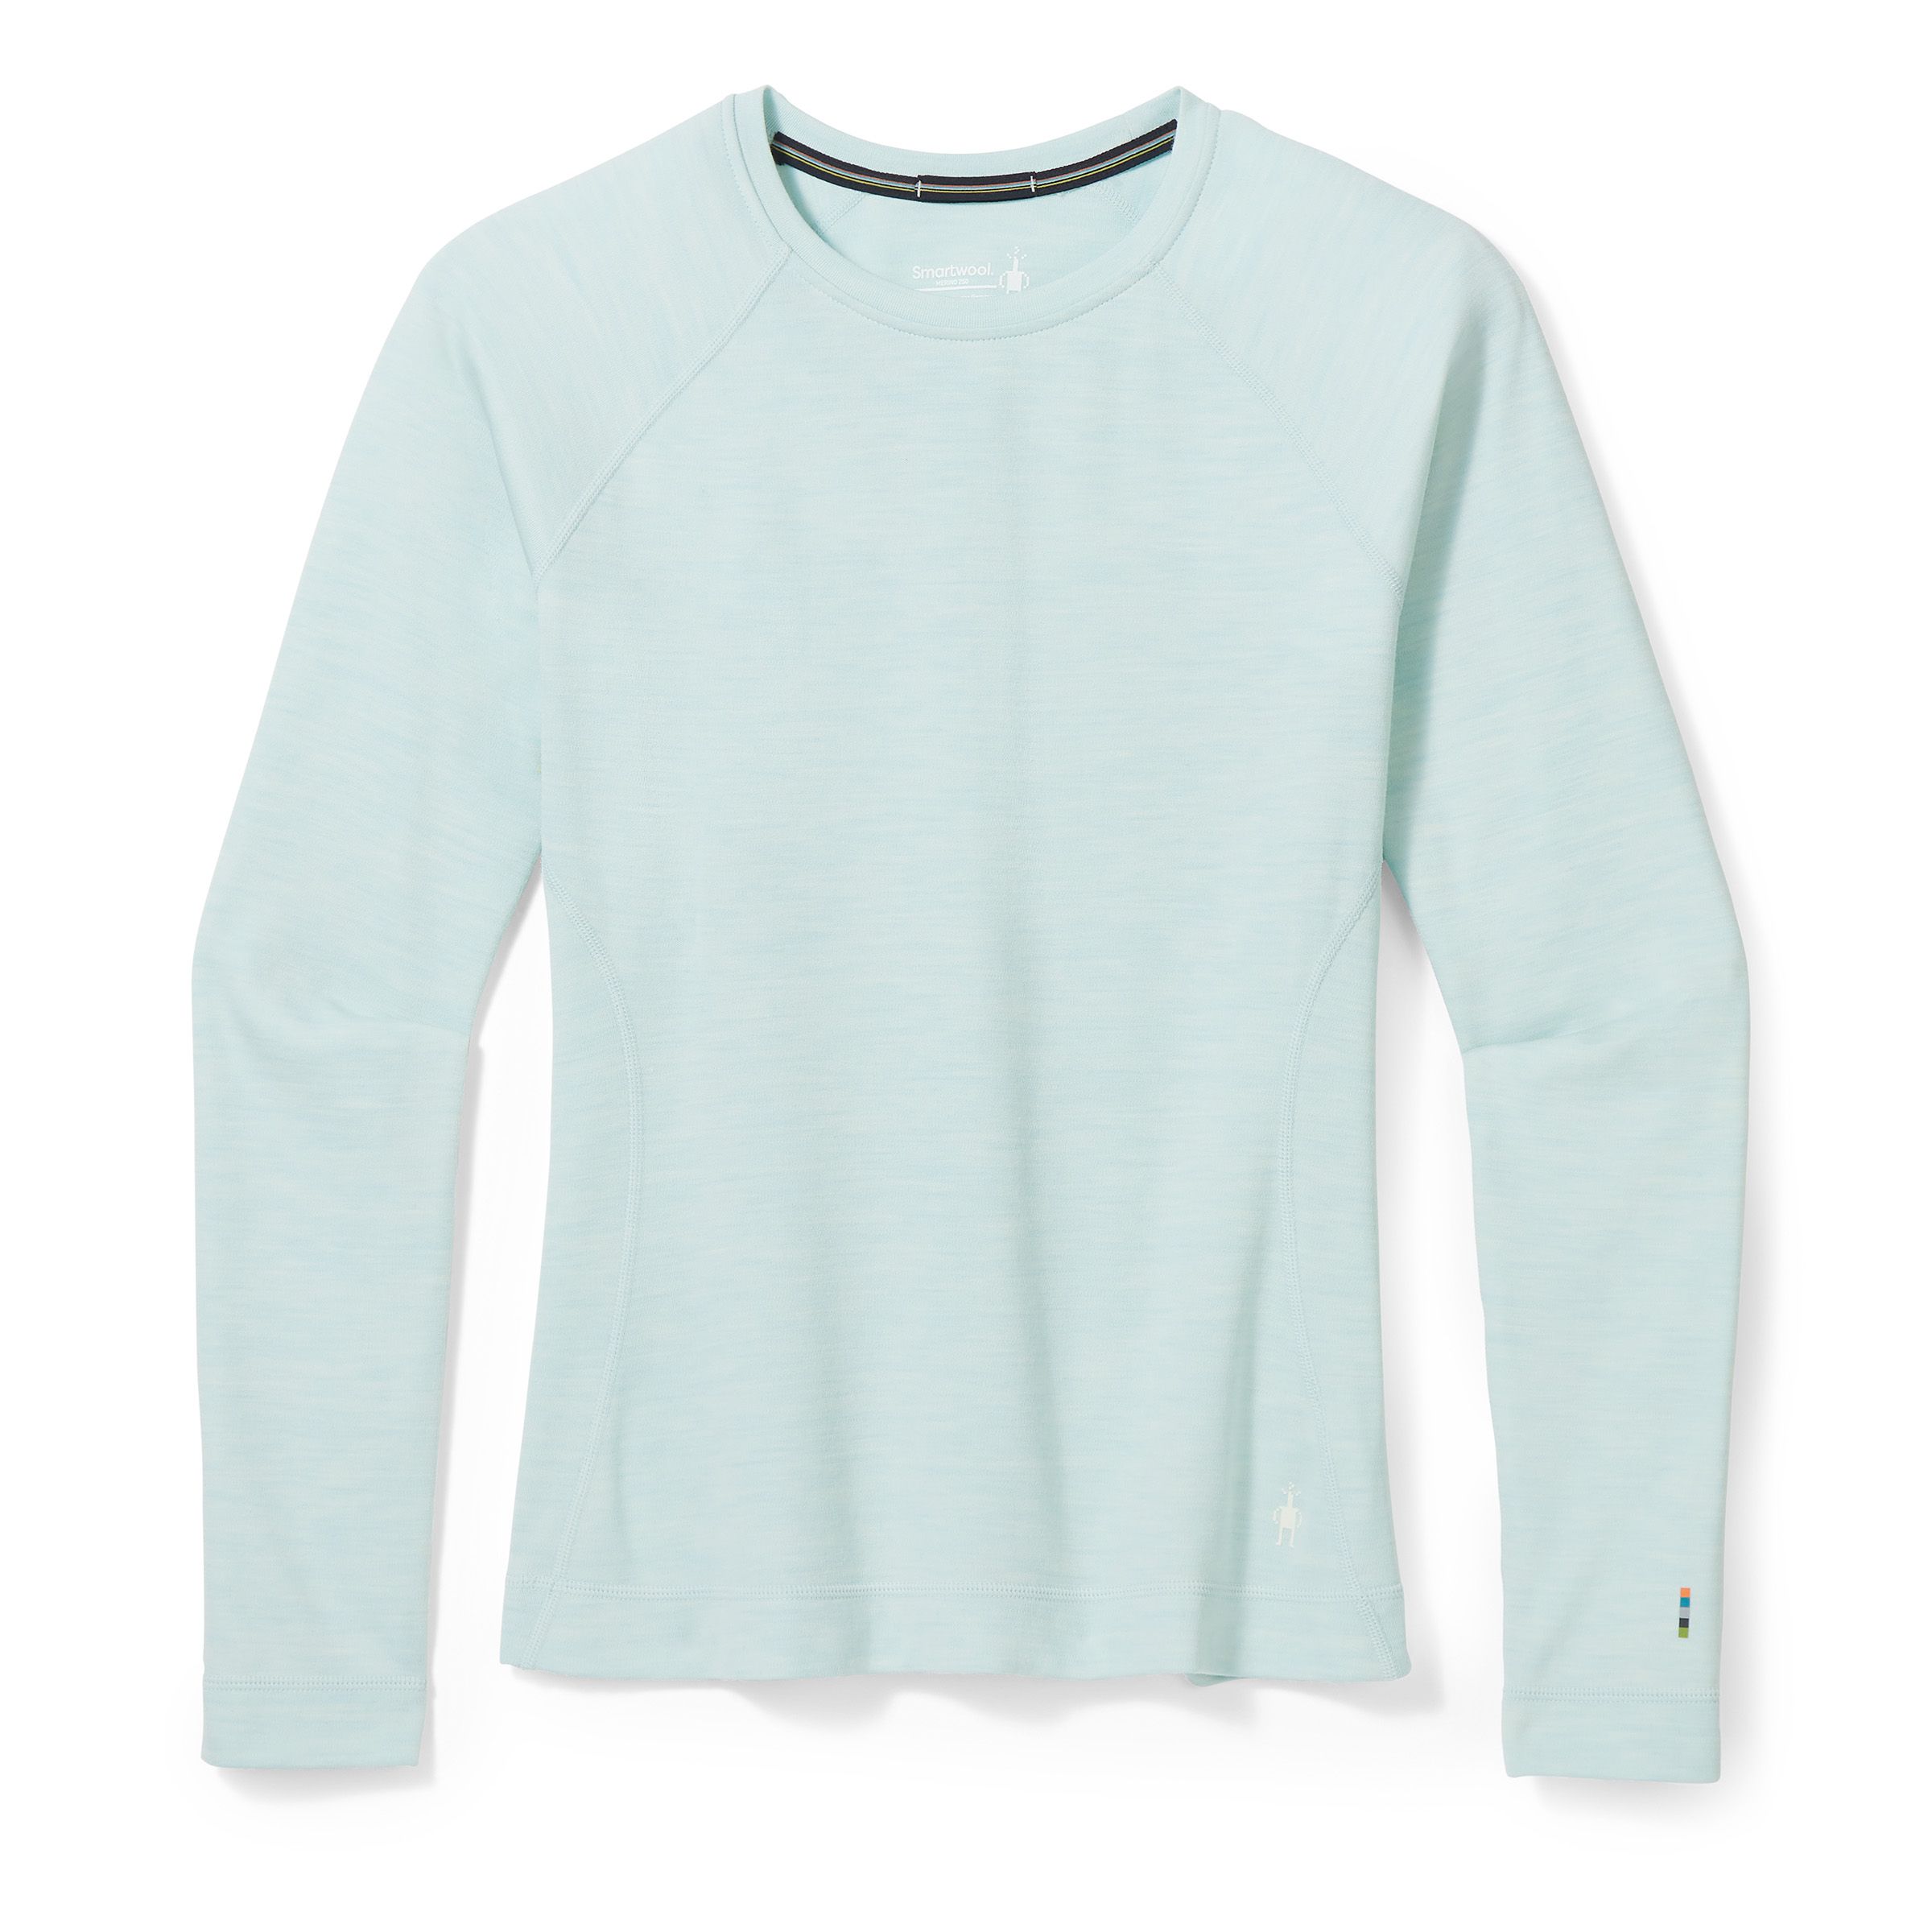 Tee Shirt Thermique Classic Thermal Merino Base Layer Crew - Bleached Aqua